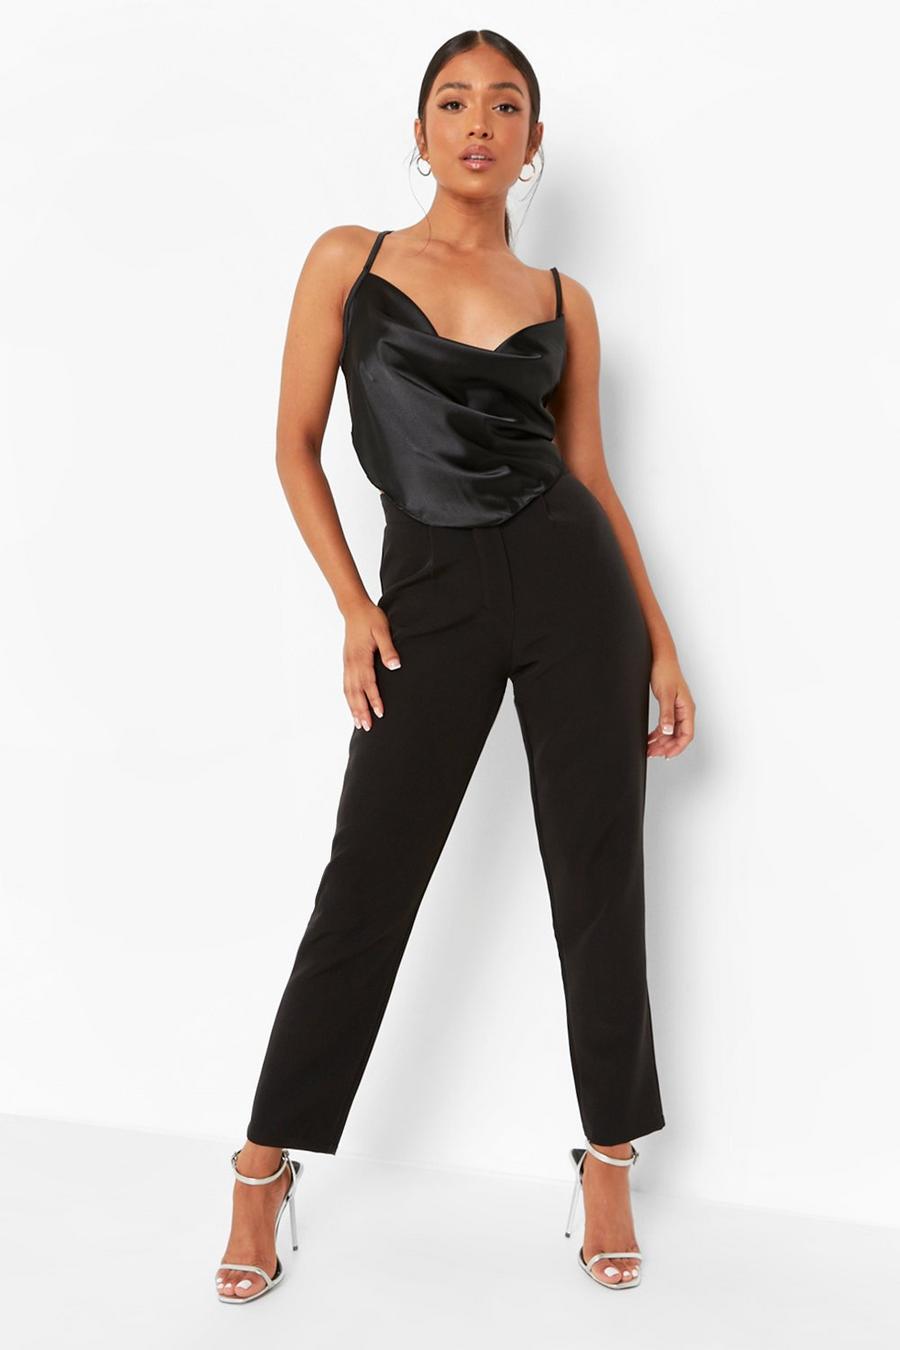 Black Petite Tailored Trousers image number 1